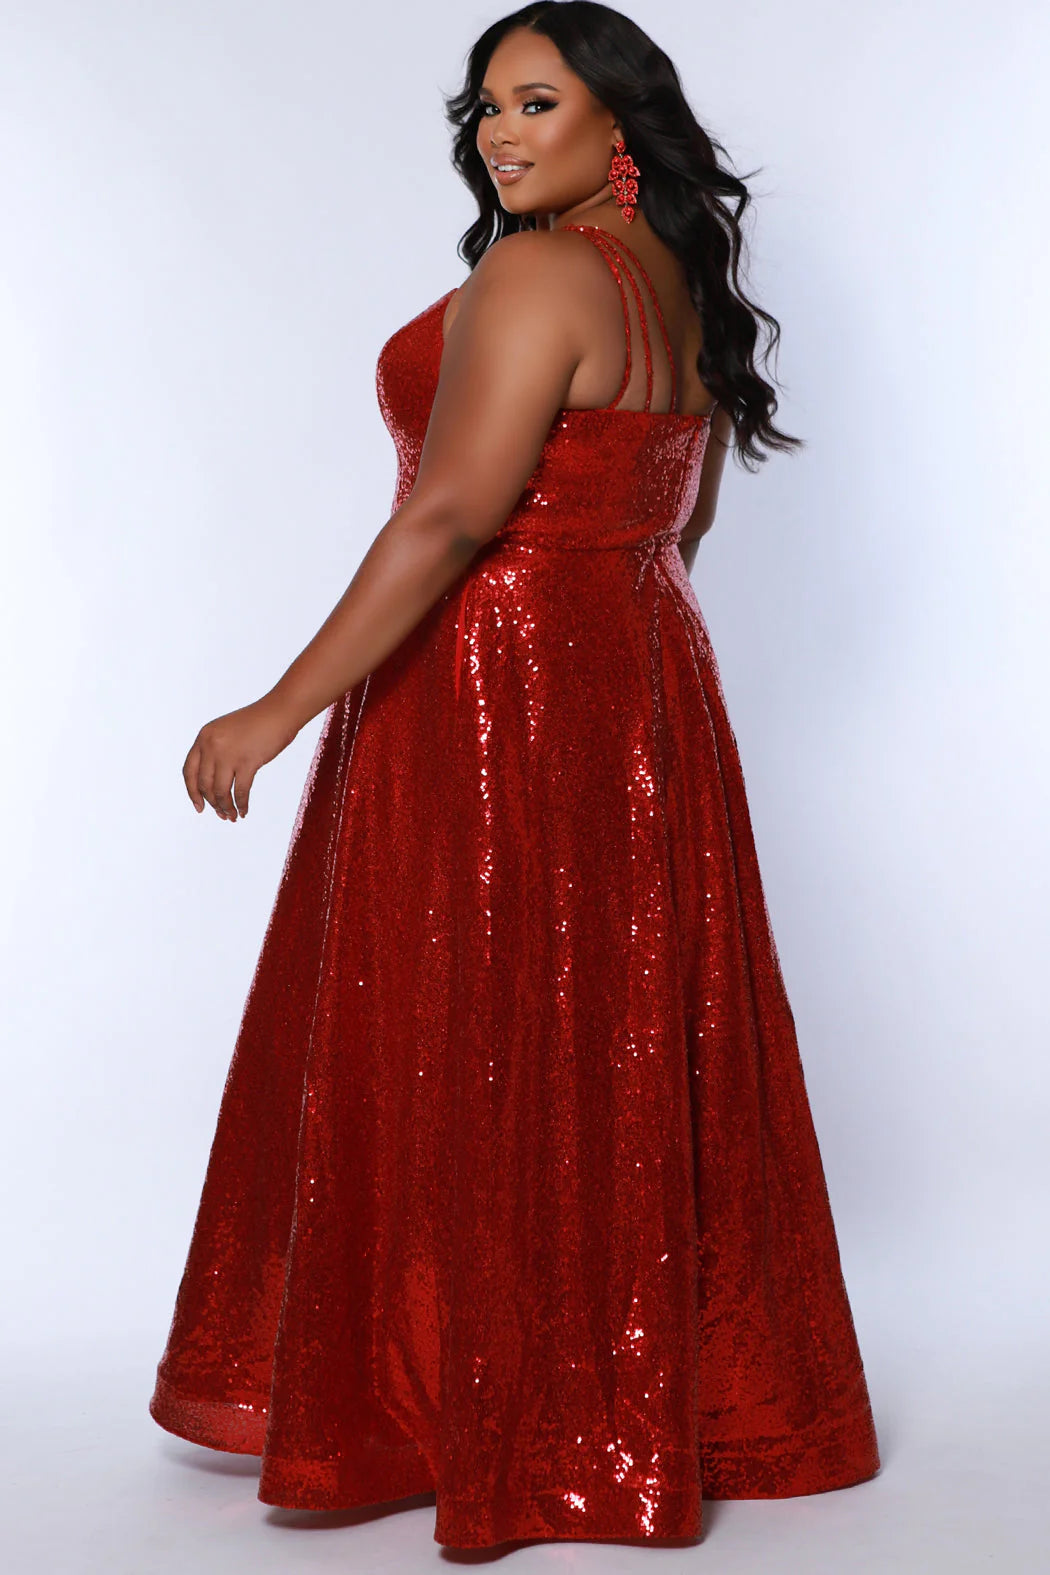 Make a statement in the Sydneys Closet SC7387 Plus Size Sequin A-Line Prom Dress. This beautiful formal gown features beaded sequin detailing, a flattering scoop neckline, and an elegant A-line silhouette. Perfect for prom, pageants, and other special occasions. Sparkle all night long when you wear this long evening gown to Prom or any other formal event on your social calendar that calls for the glamour of overall sequins.